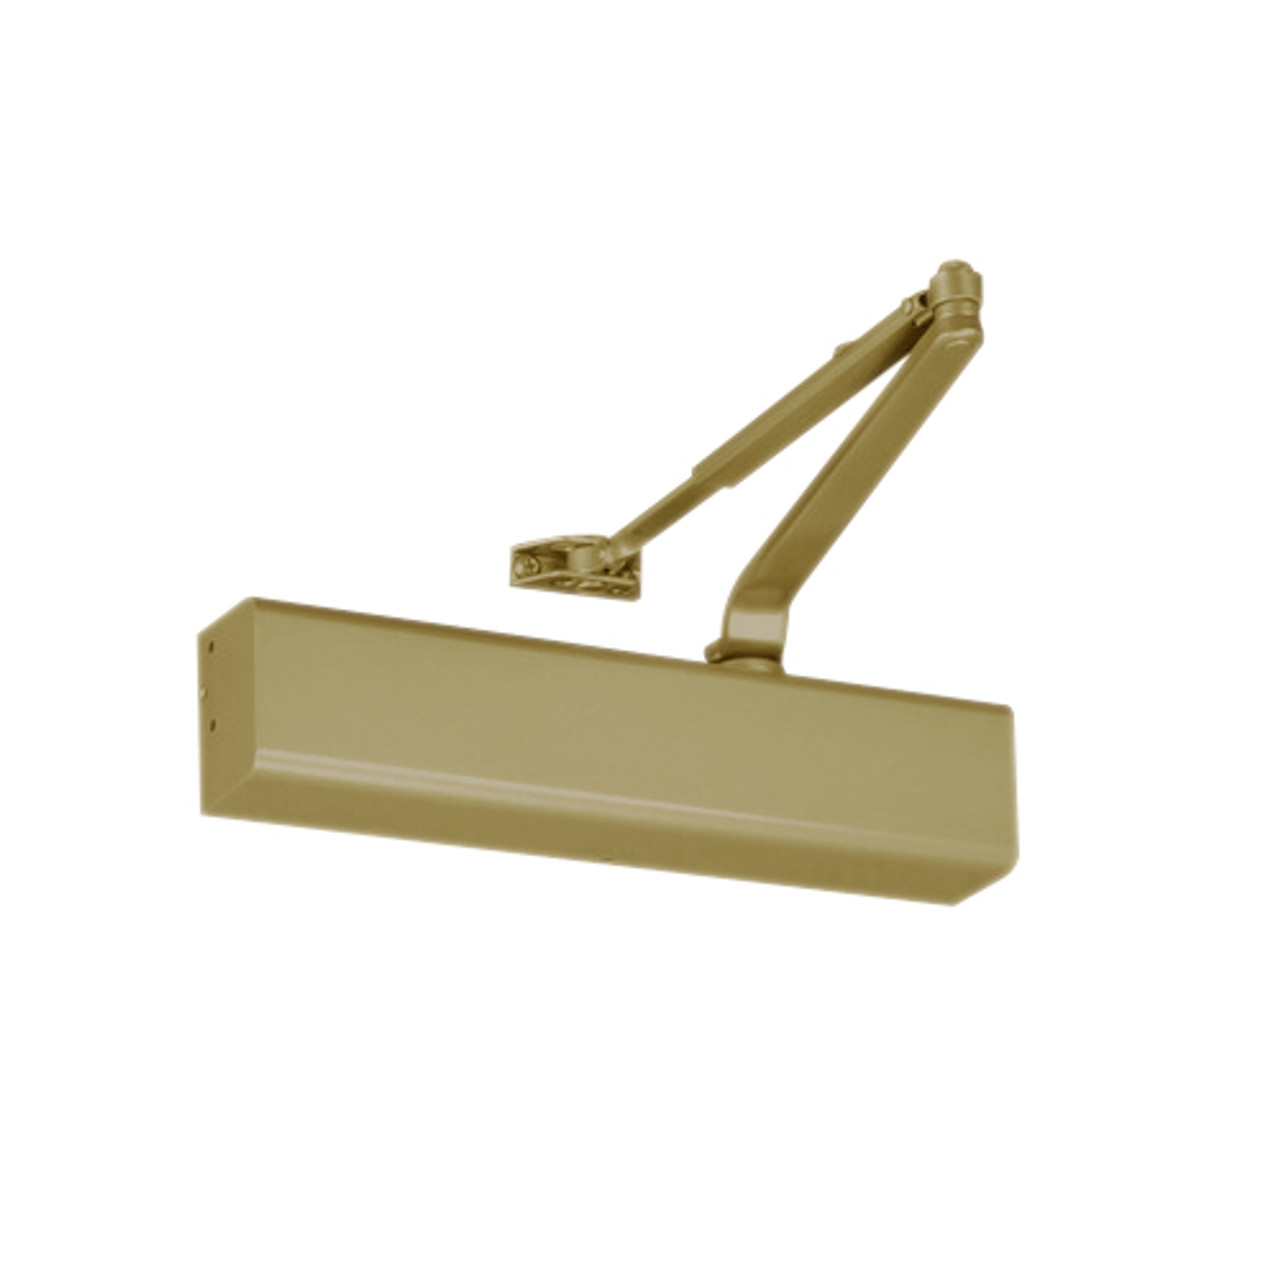 S8501M-696 Norton 8000 Series Full Cover Non-Hold Open Door Closers with Regular Arm Application in Gold Finish